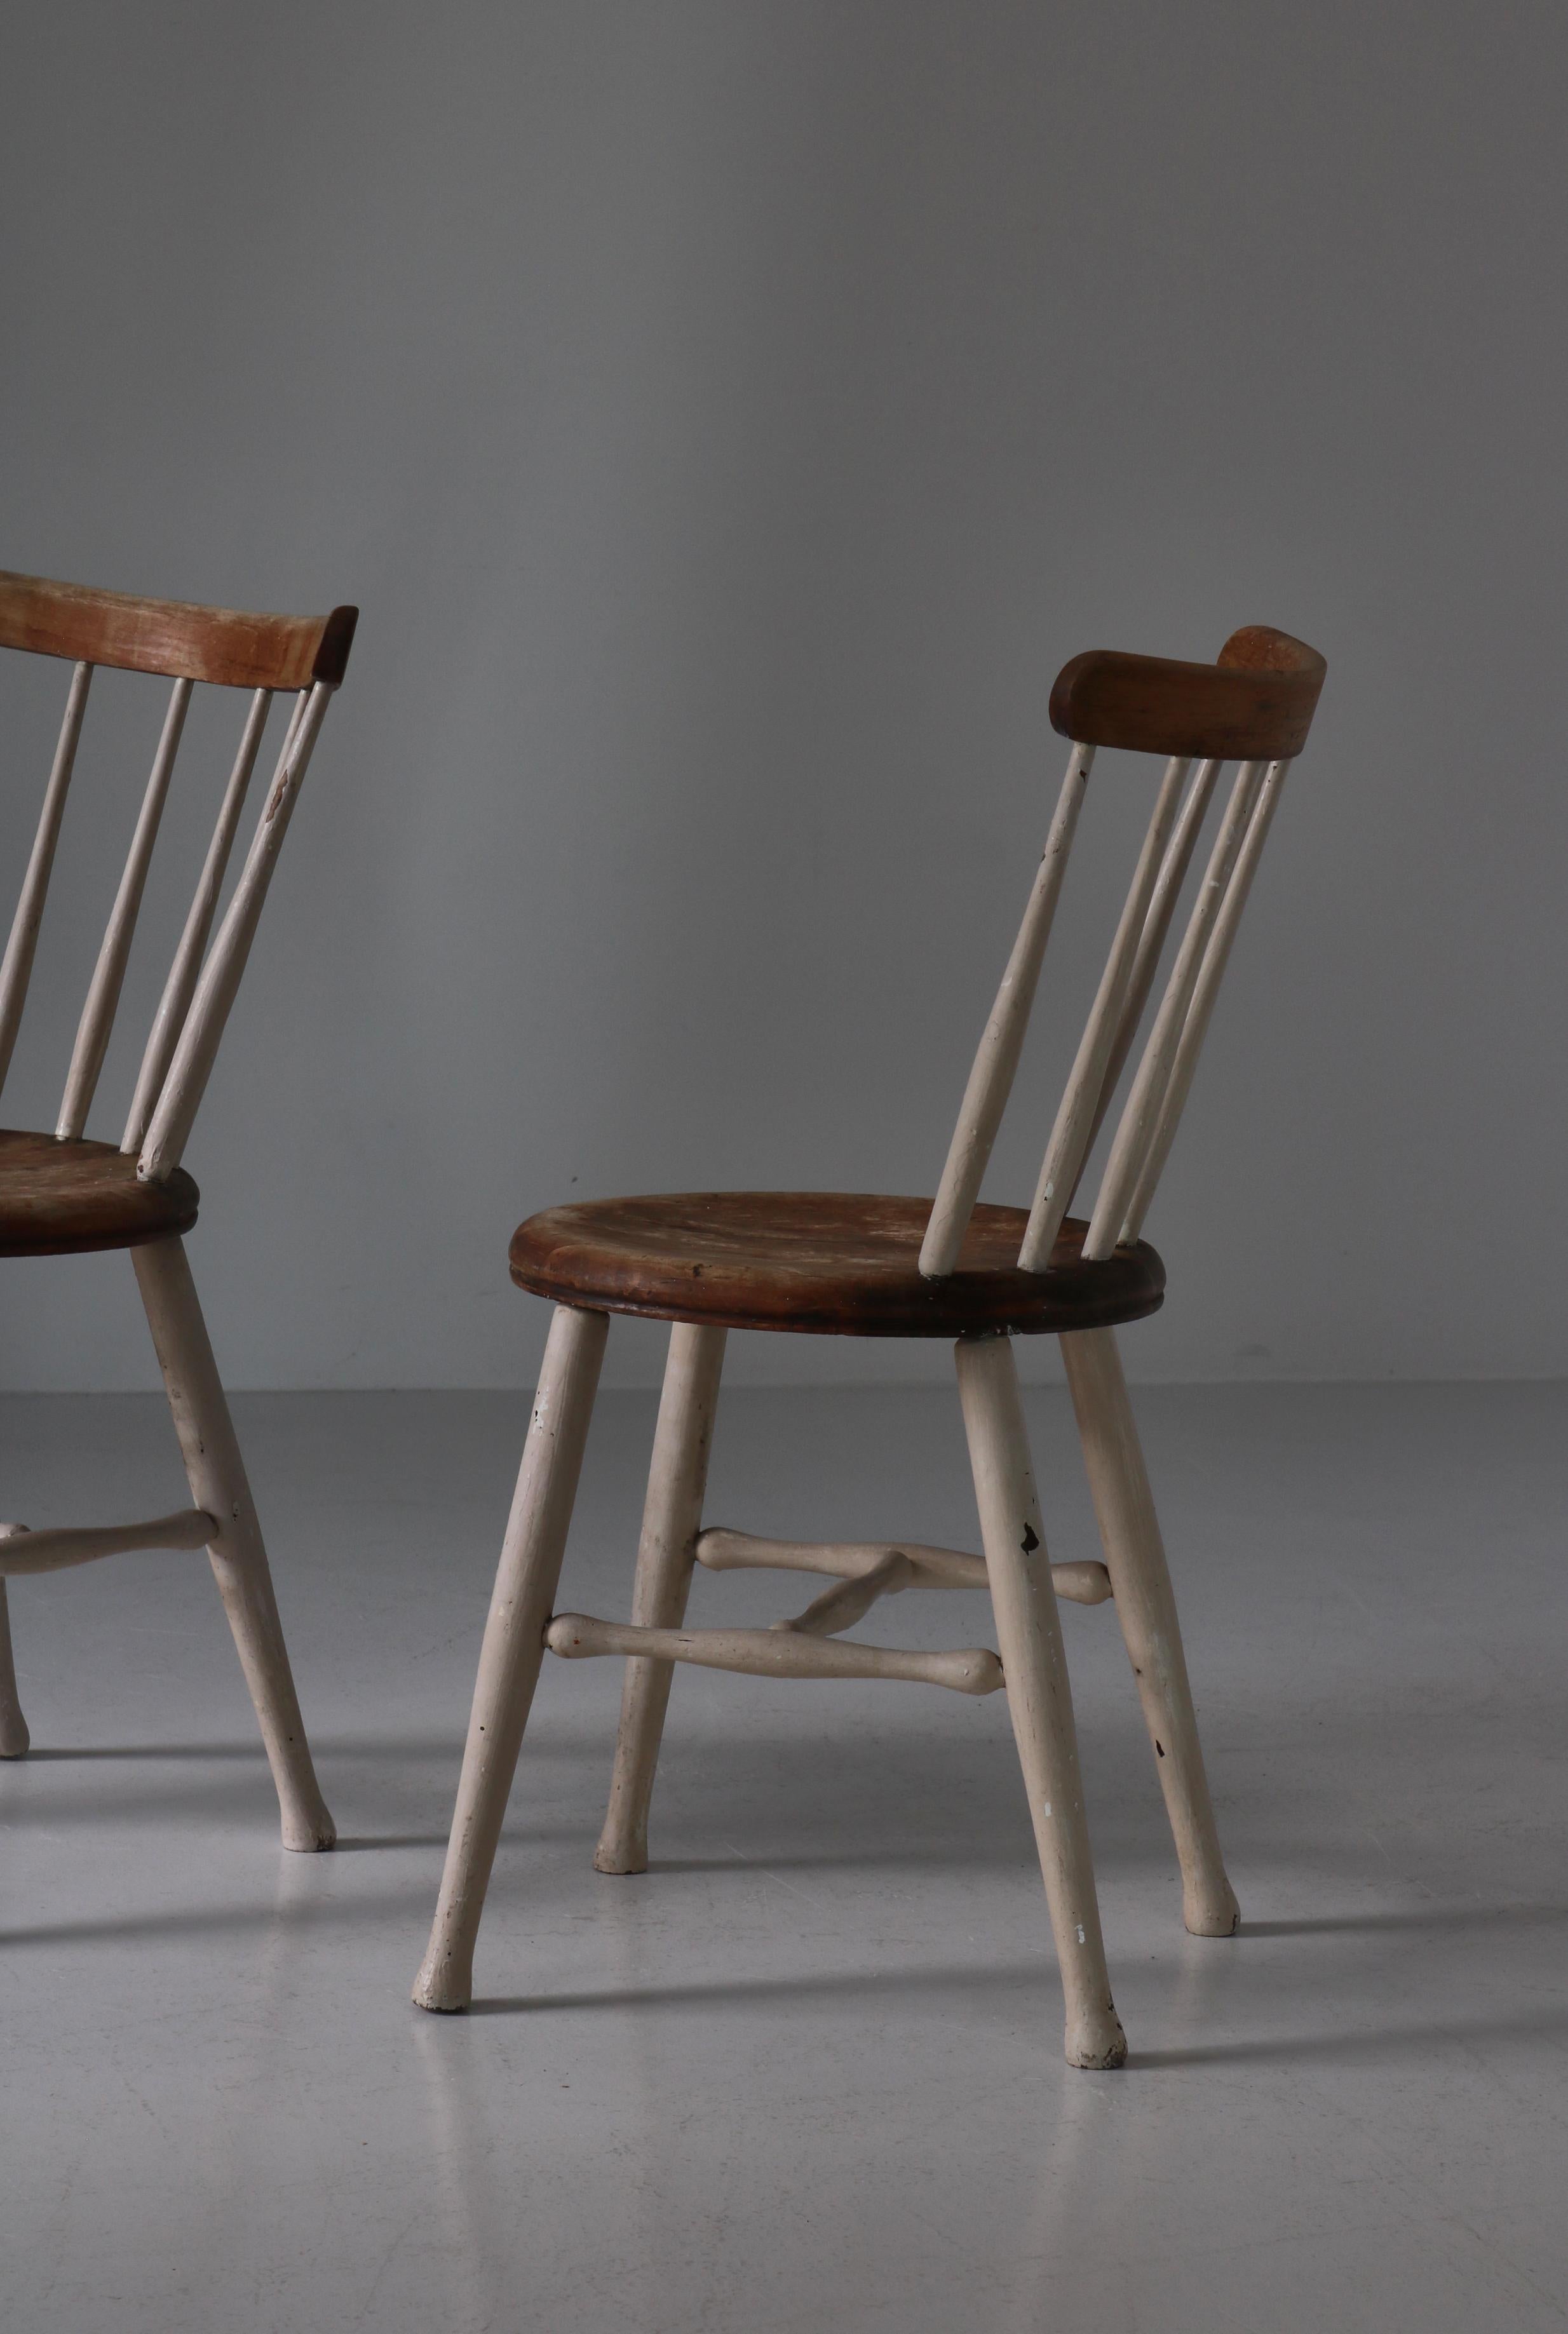 Danish Cabinetmaker Antique Folk Art Spindle Chairs, Early 20th Century In Fair Condition For Sale In Odense, DK